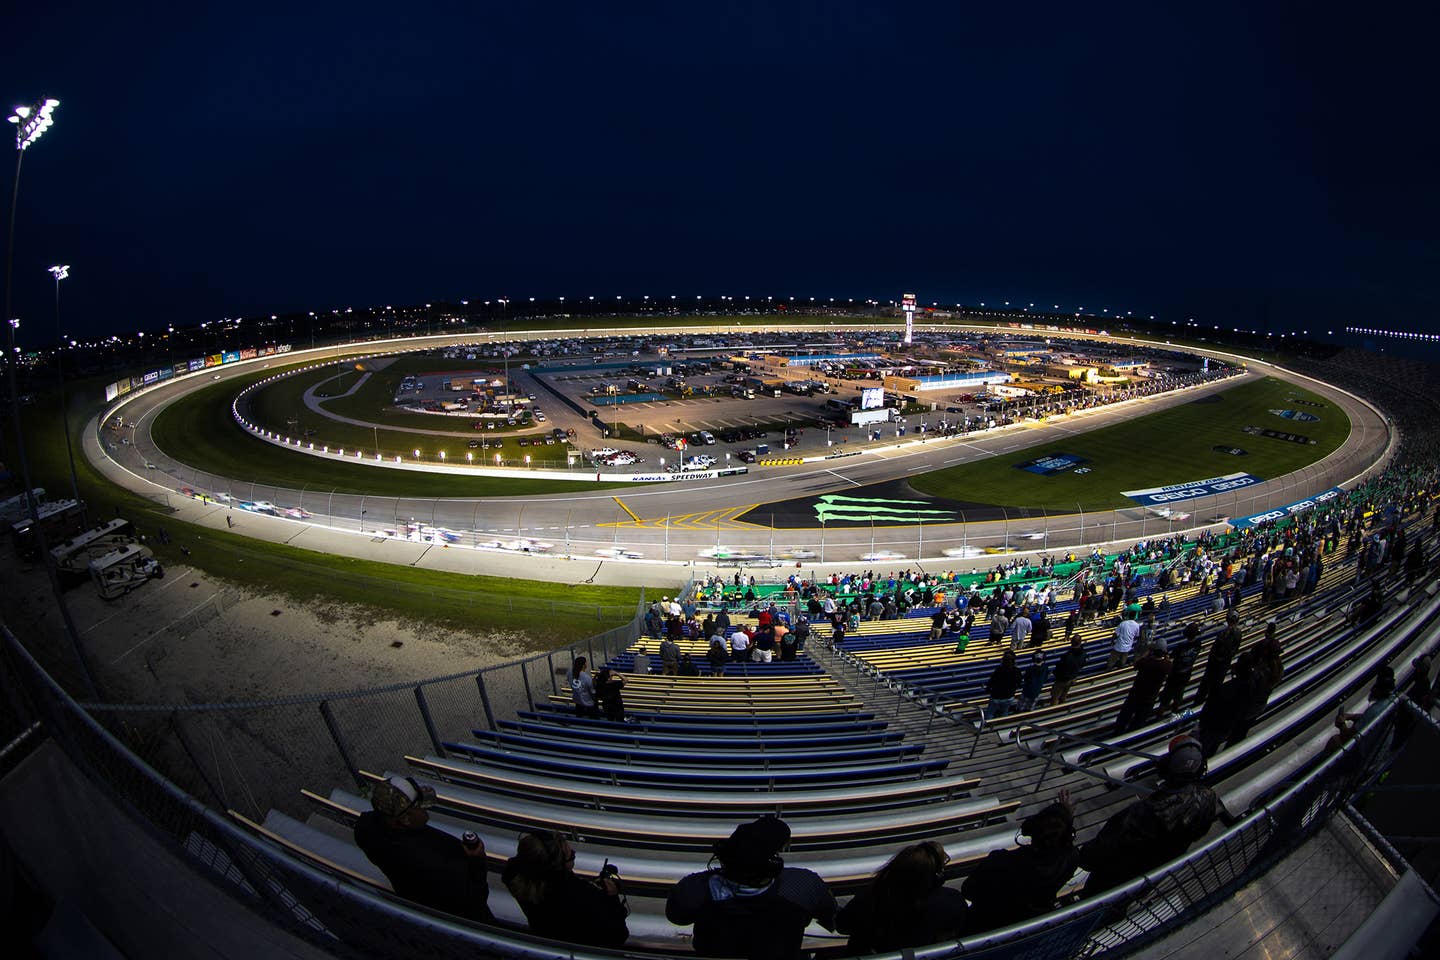 NASCAR Camping World Truck Series - Wise Power 200